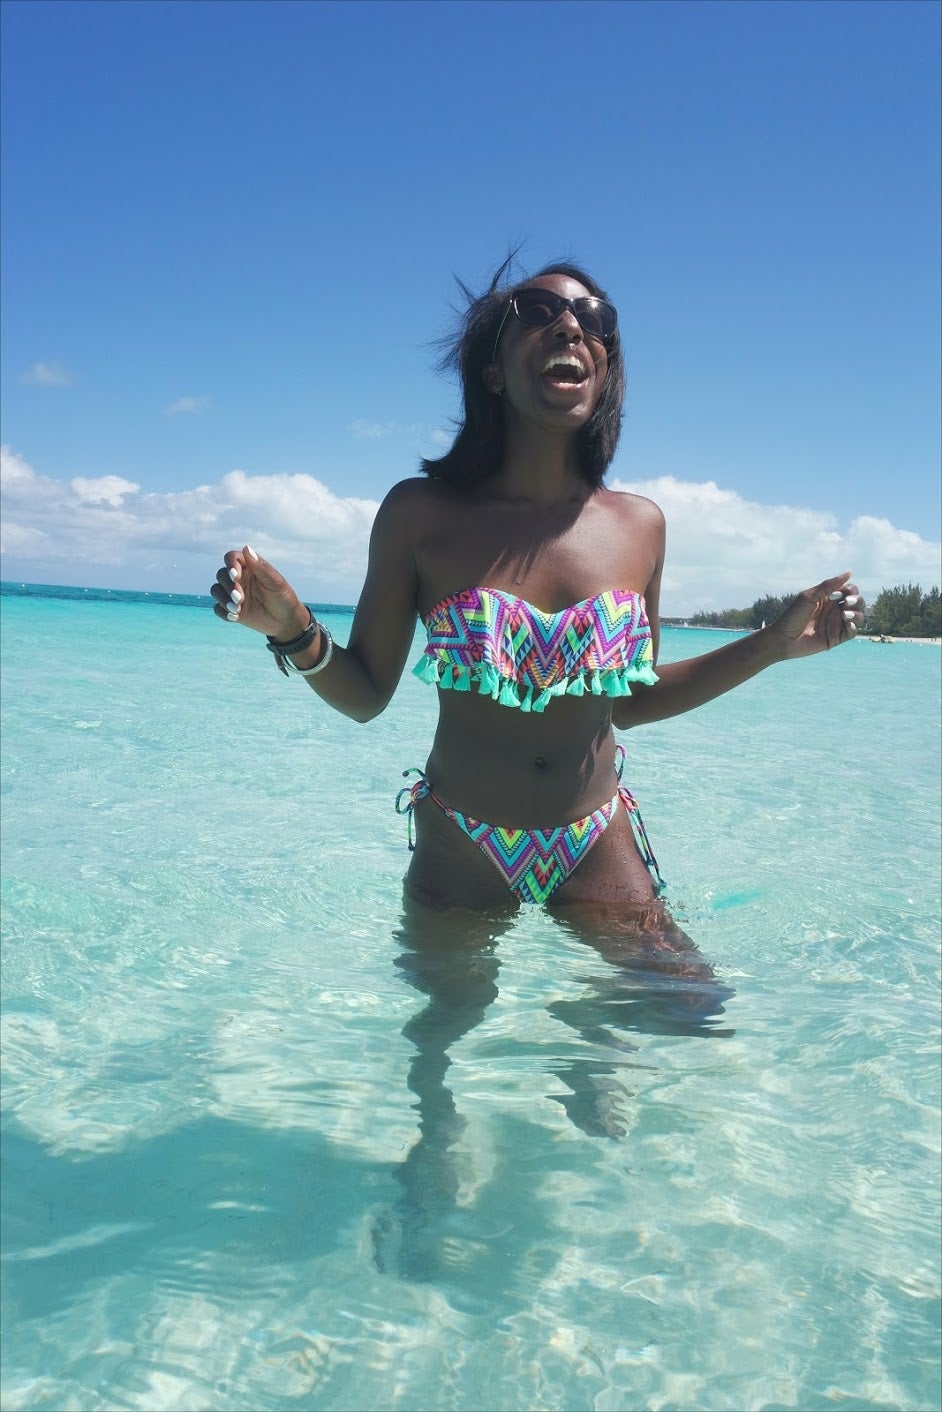 10 Reasons Your Next Trip Should Be Providenciales, Turks & Caicos